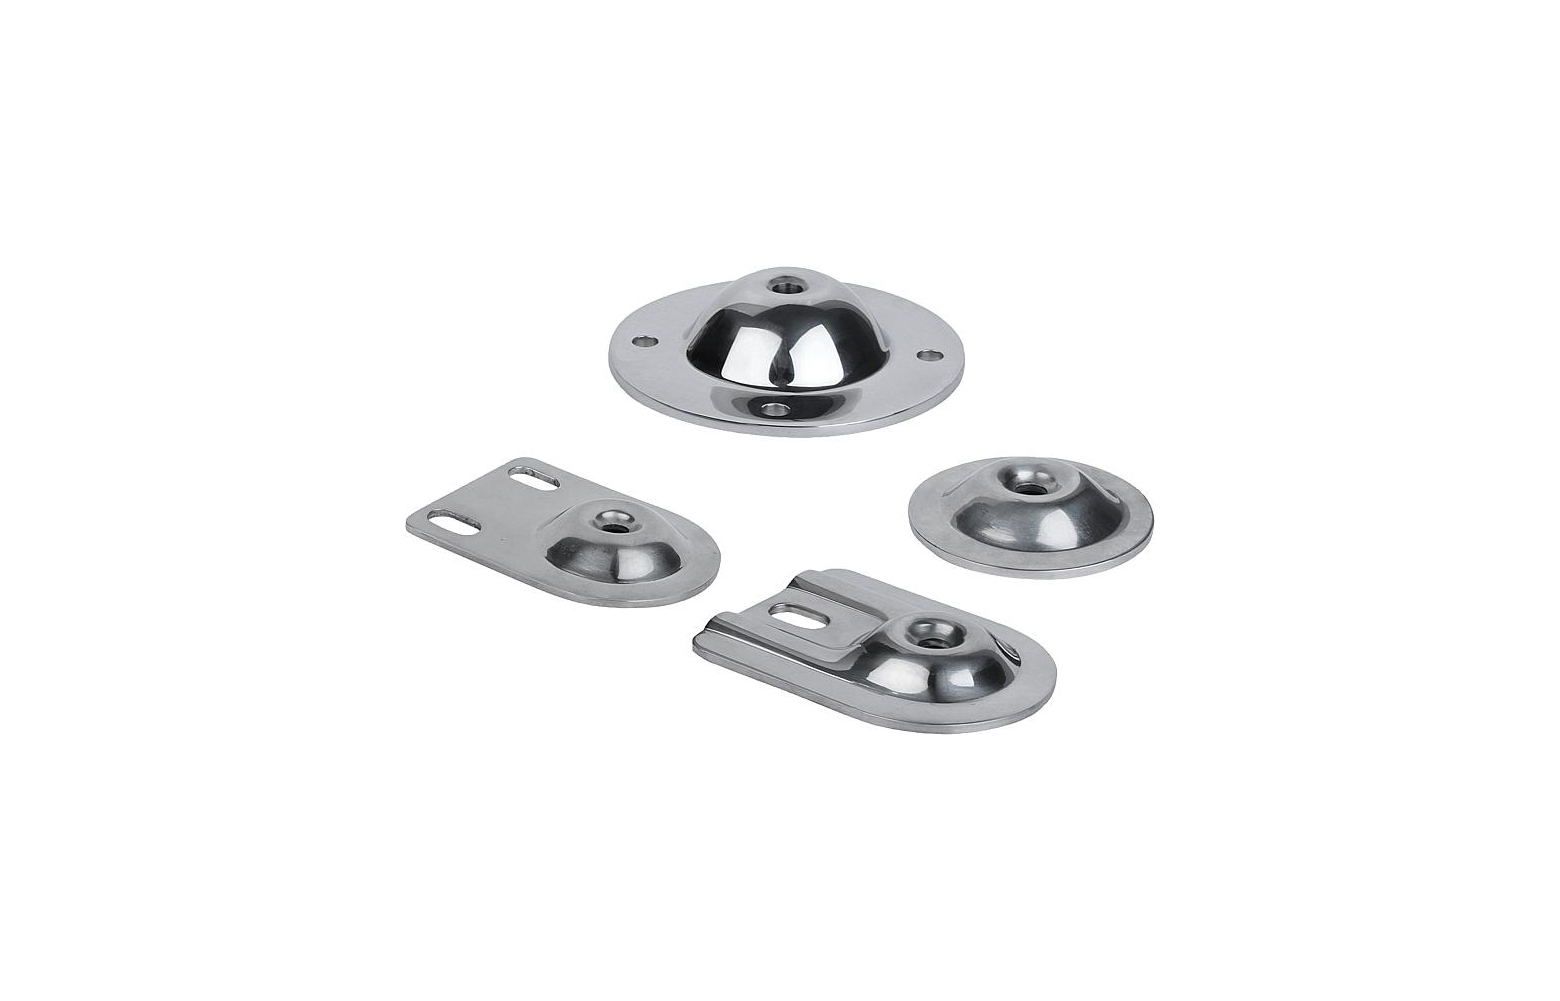 K0672 Levelling feet plates steel or stainless steel